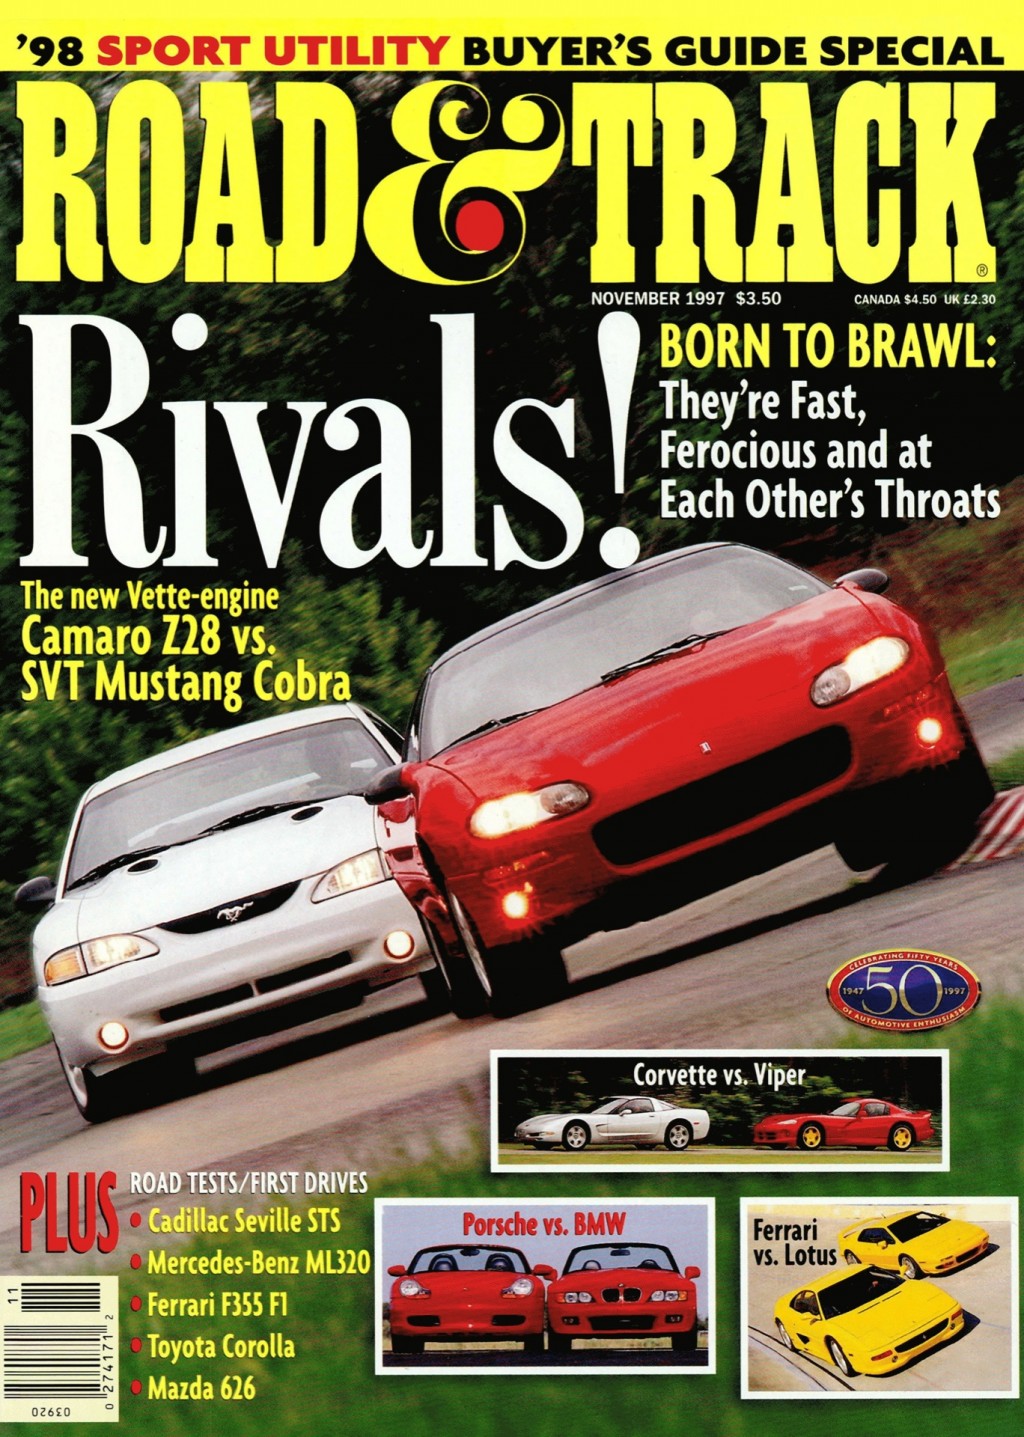 s-mustang-magazine-covers--courtesy-gm_100464159_l.jpg